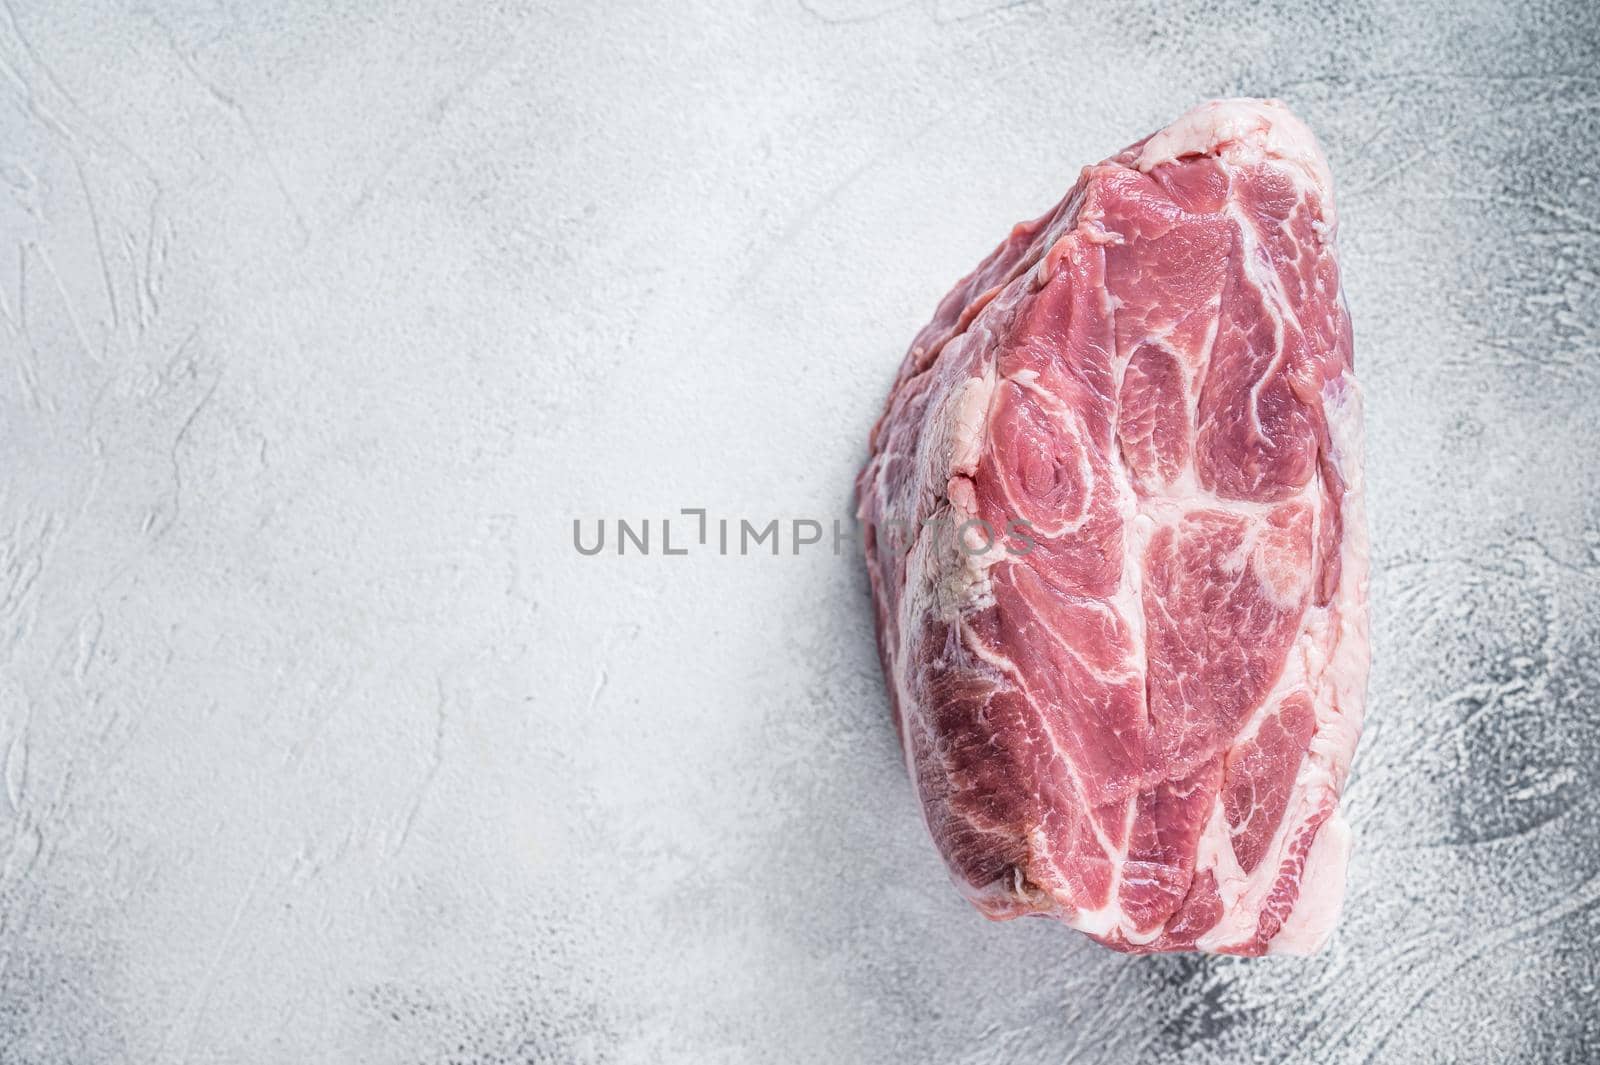 Raw pork neck meat for Chop steak on kichen table. White background. Top view. Copy space.